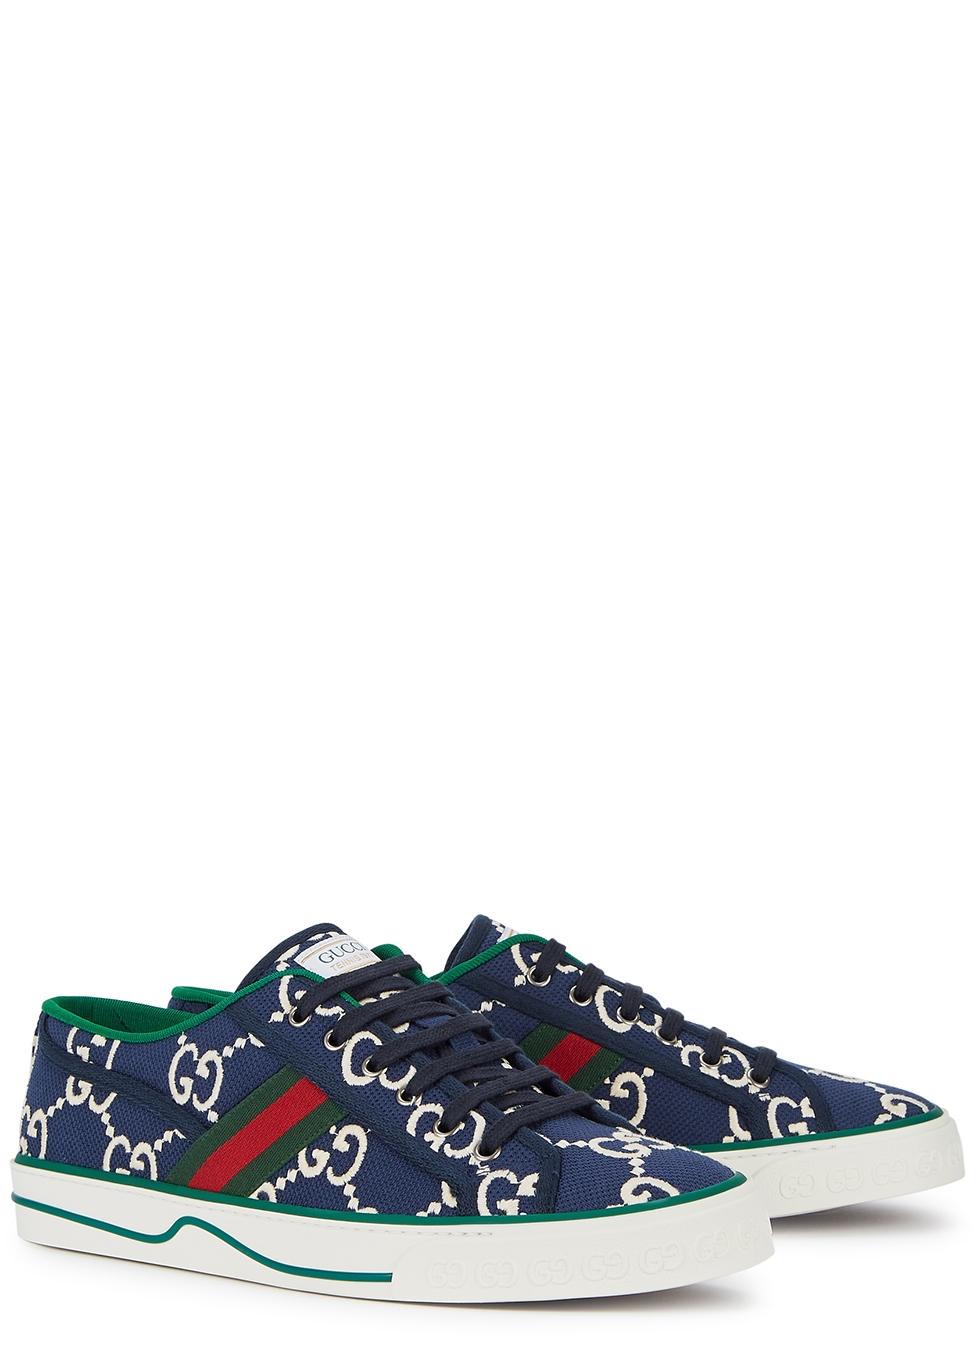 Gucci Canvas Low Trainers in Blue & White (Blue) for Men - Lyst